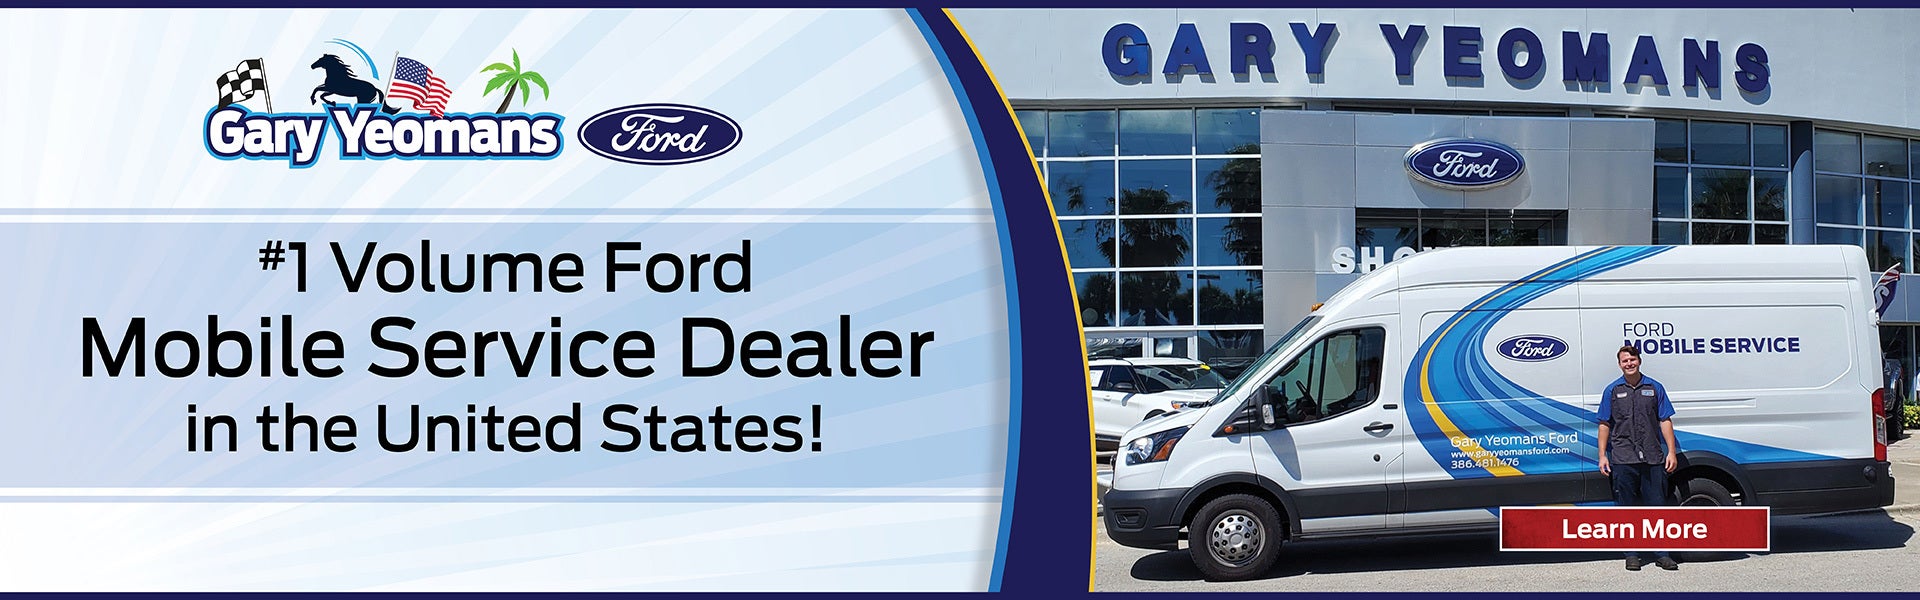 Gary Yeomans Ford Villages in Belleview FL